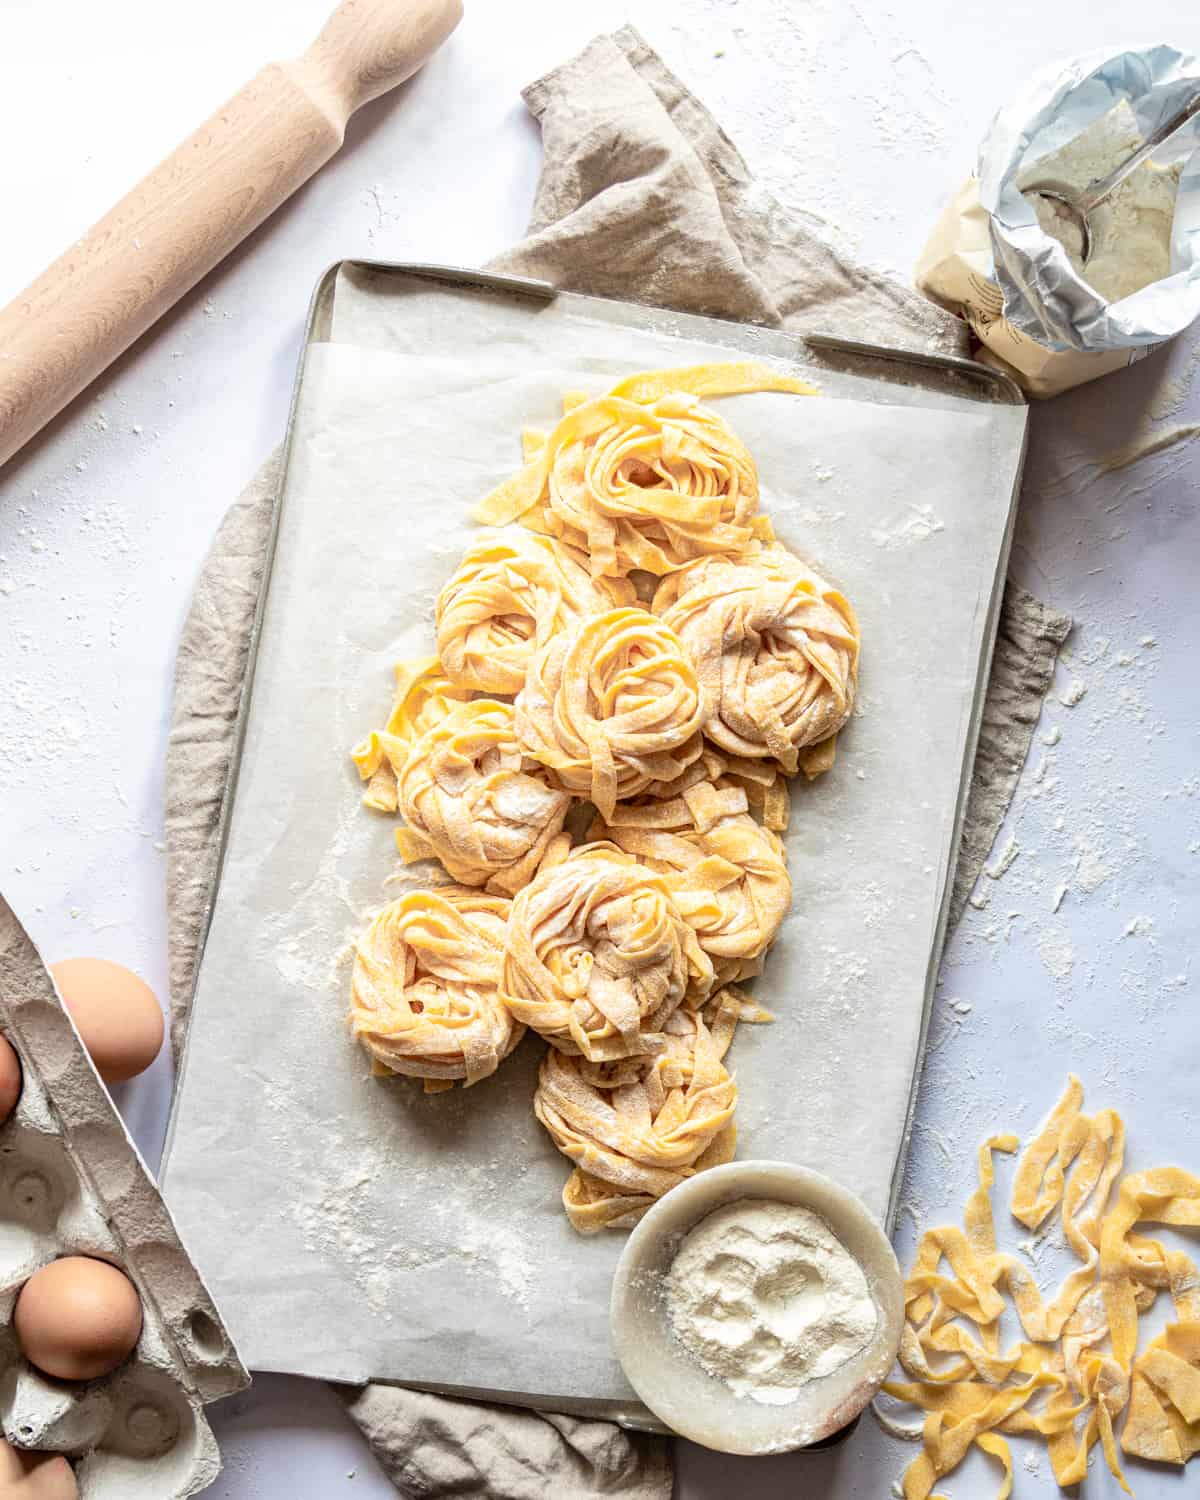 Nest of homemade pasta on a tray with eggs and a rolling pin with a bowl of flour